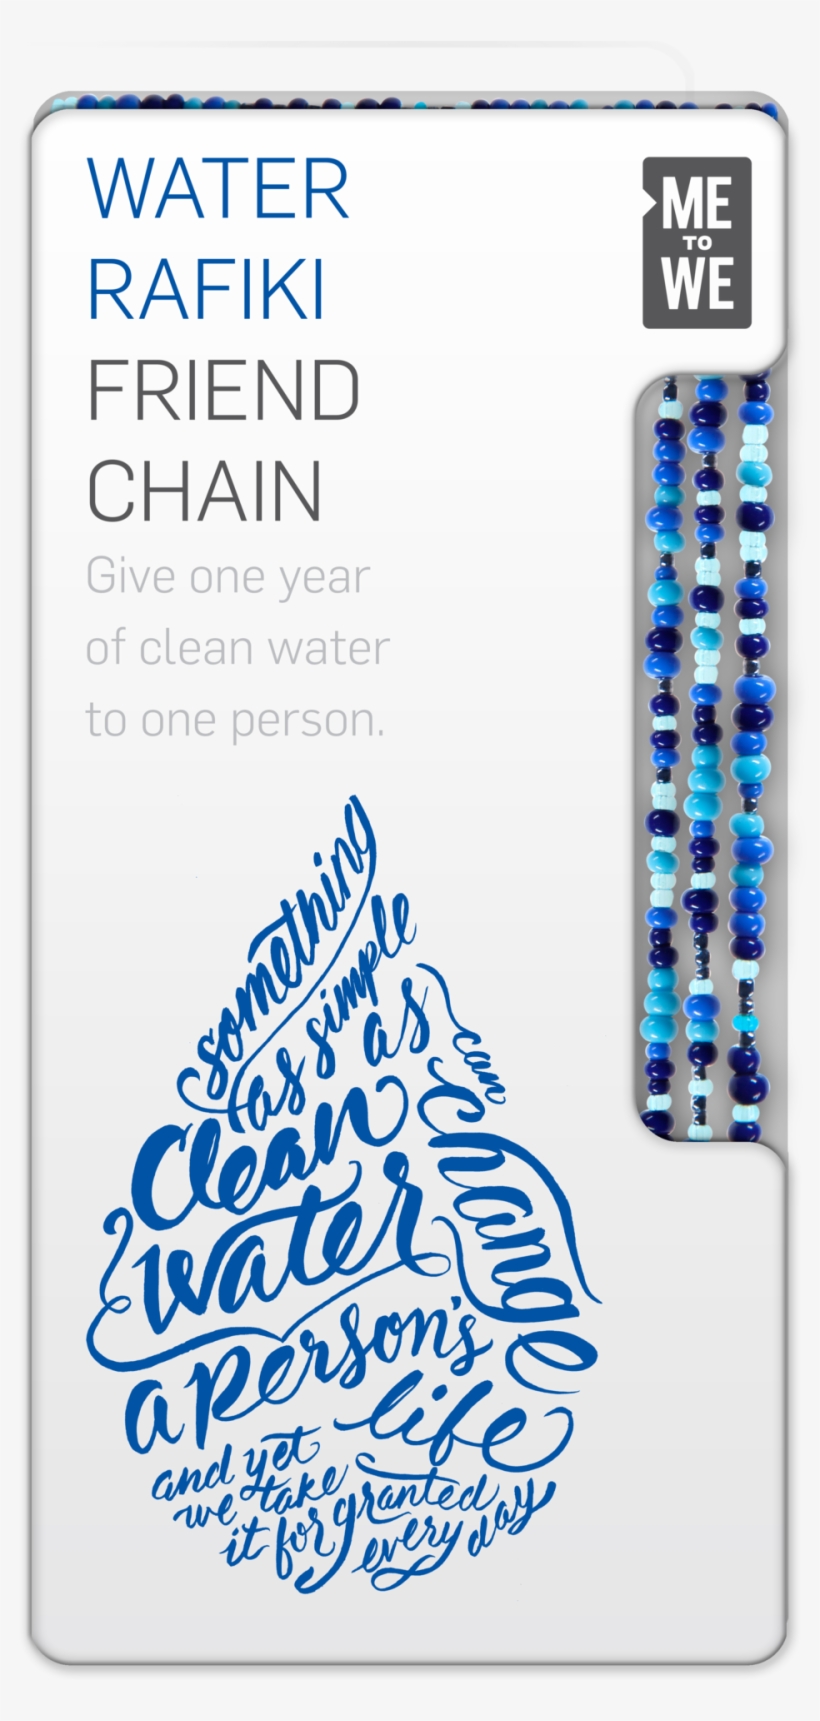 Every $10 Water Rafiki Friend Chain Provides One Person - Me To We, transparent png #8196911